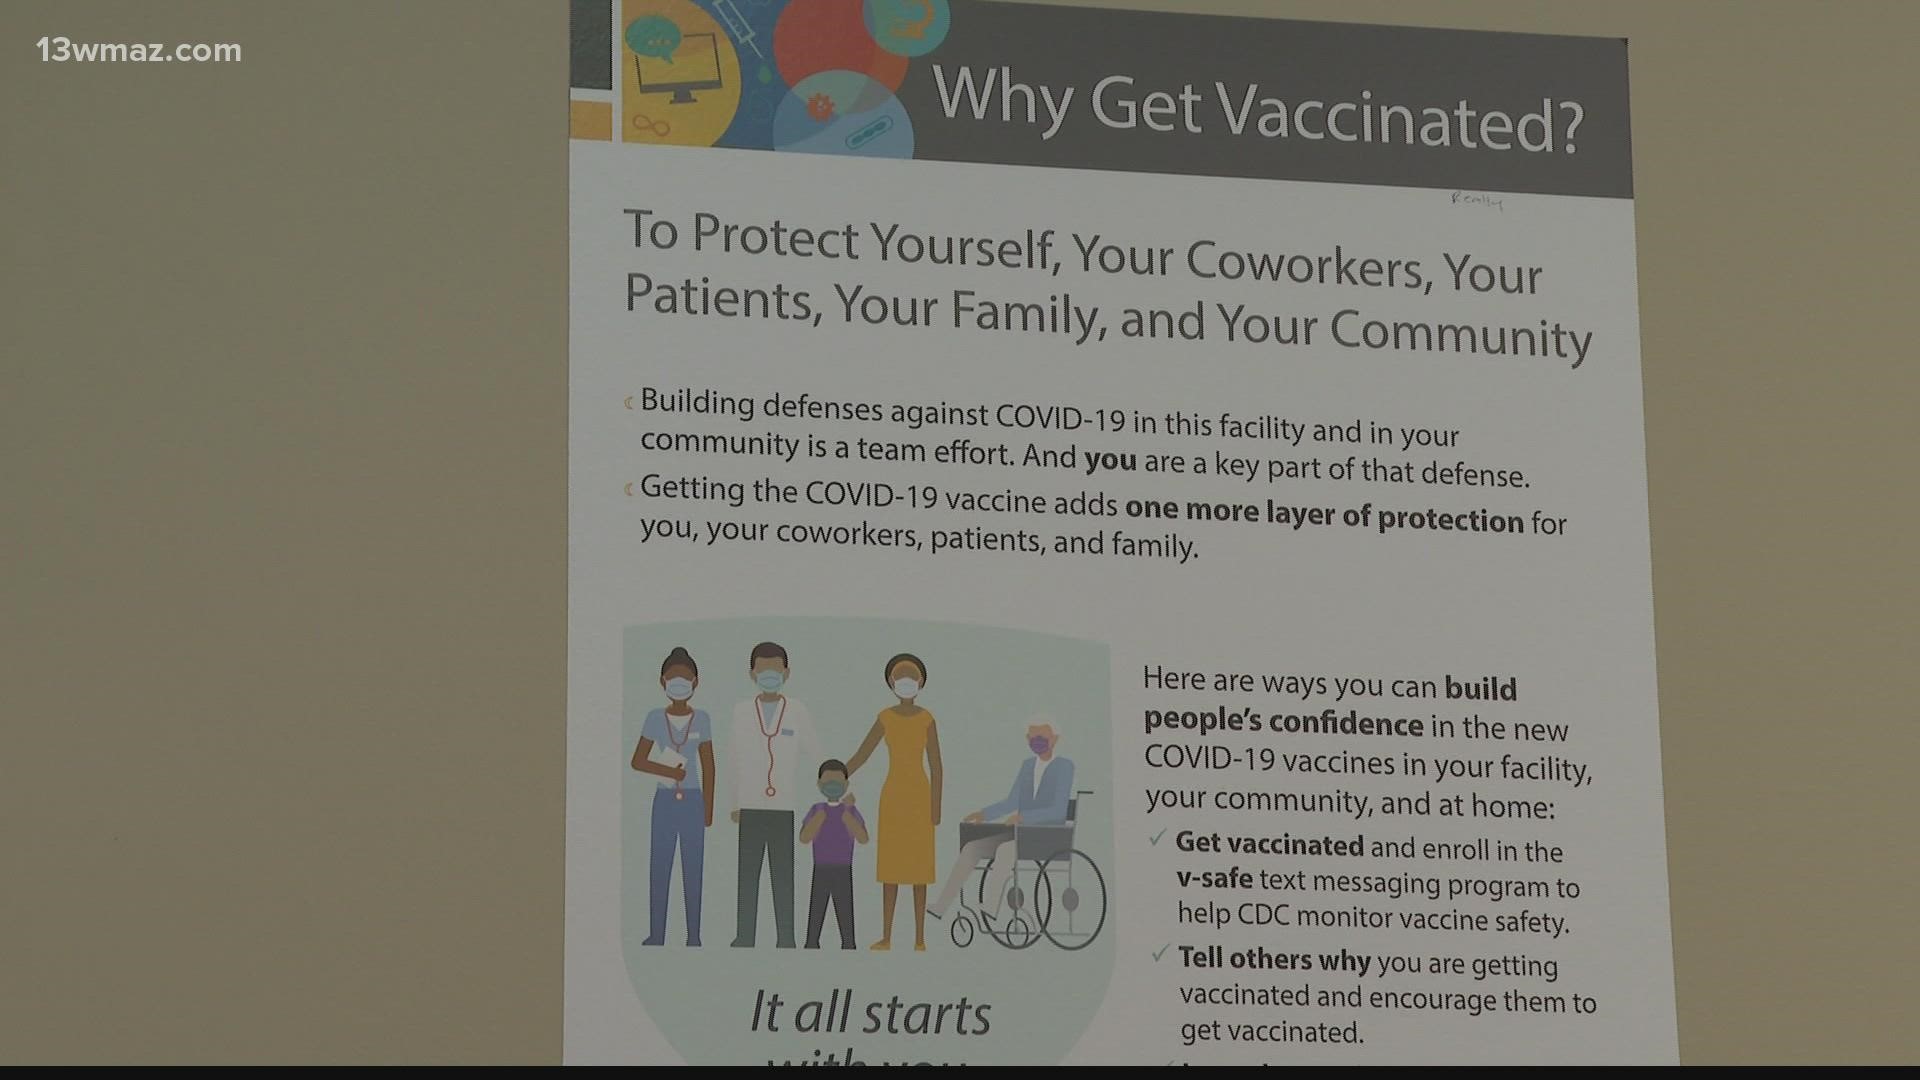 With more than 700 full-time employees they say their vaccination rate in Central Georgia is 64%. The rate for Bibb County 45%.